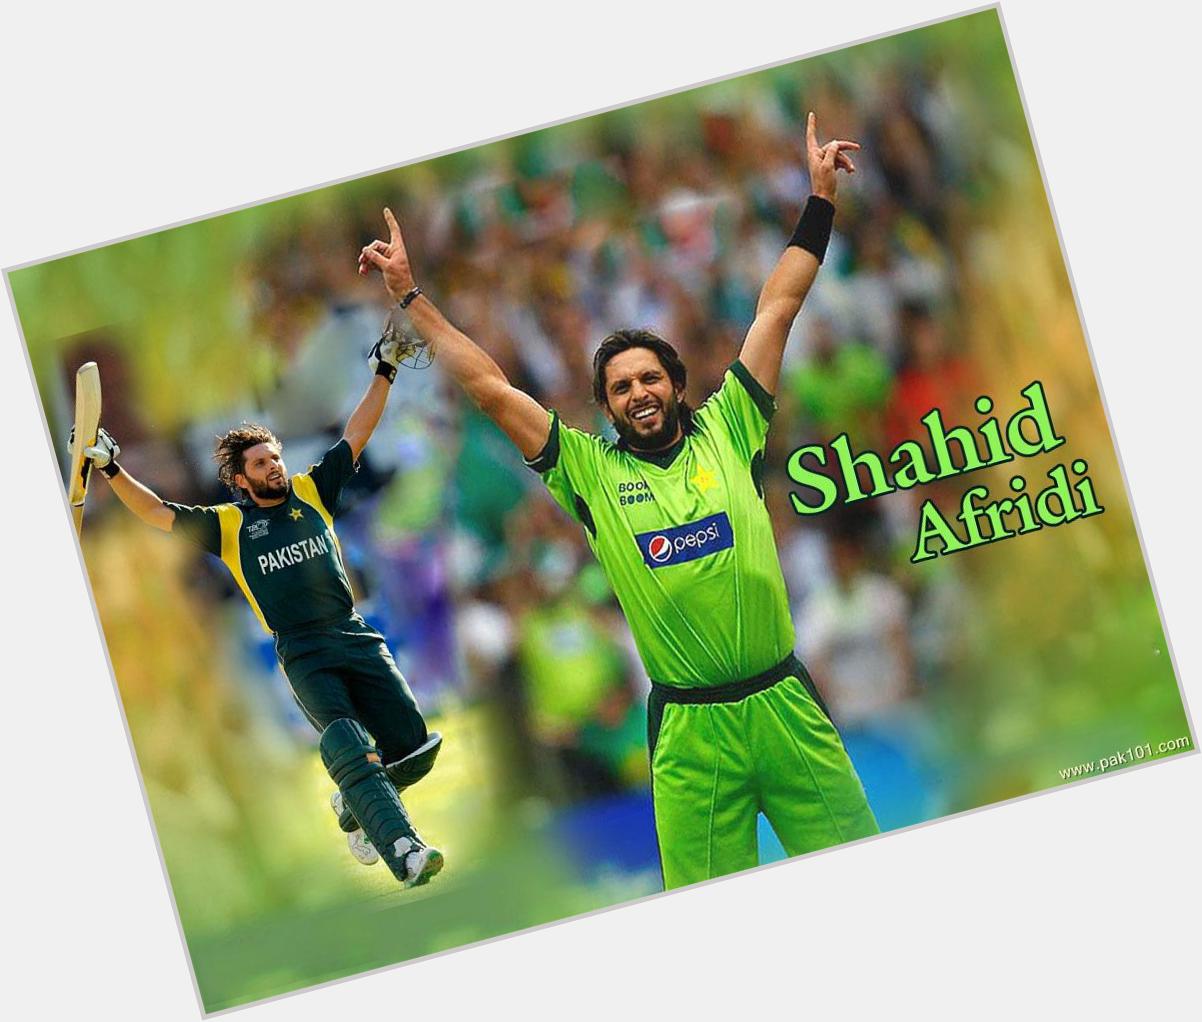 Happy birthday shahid afridi hoping a good game from you 